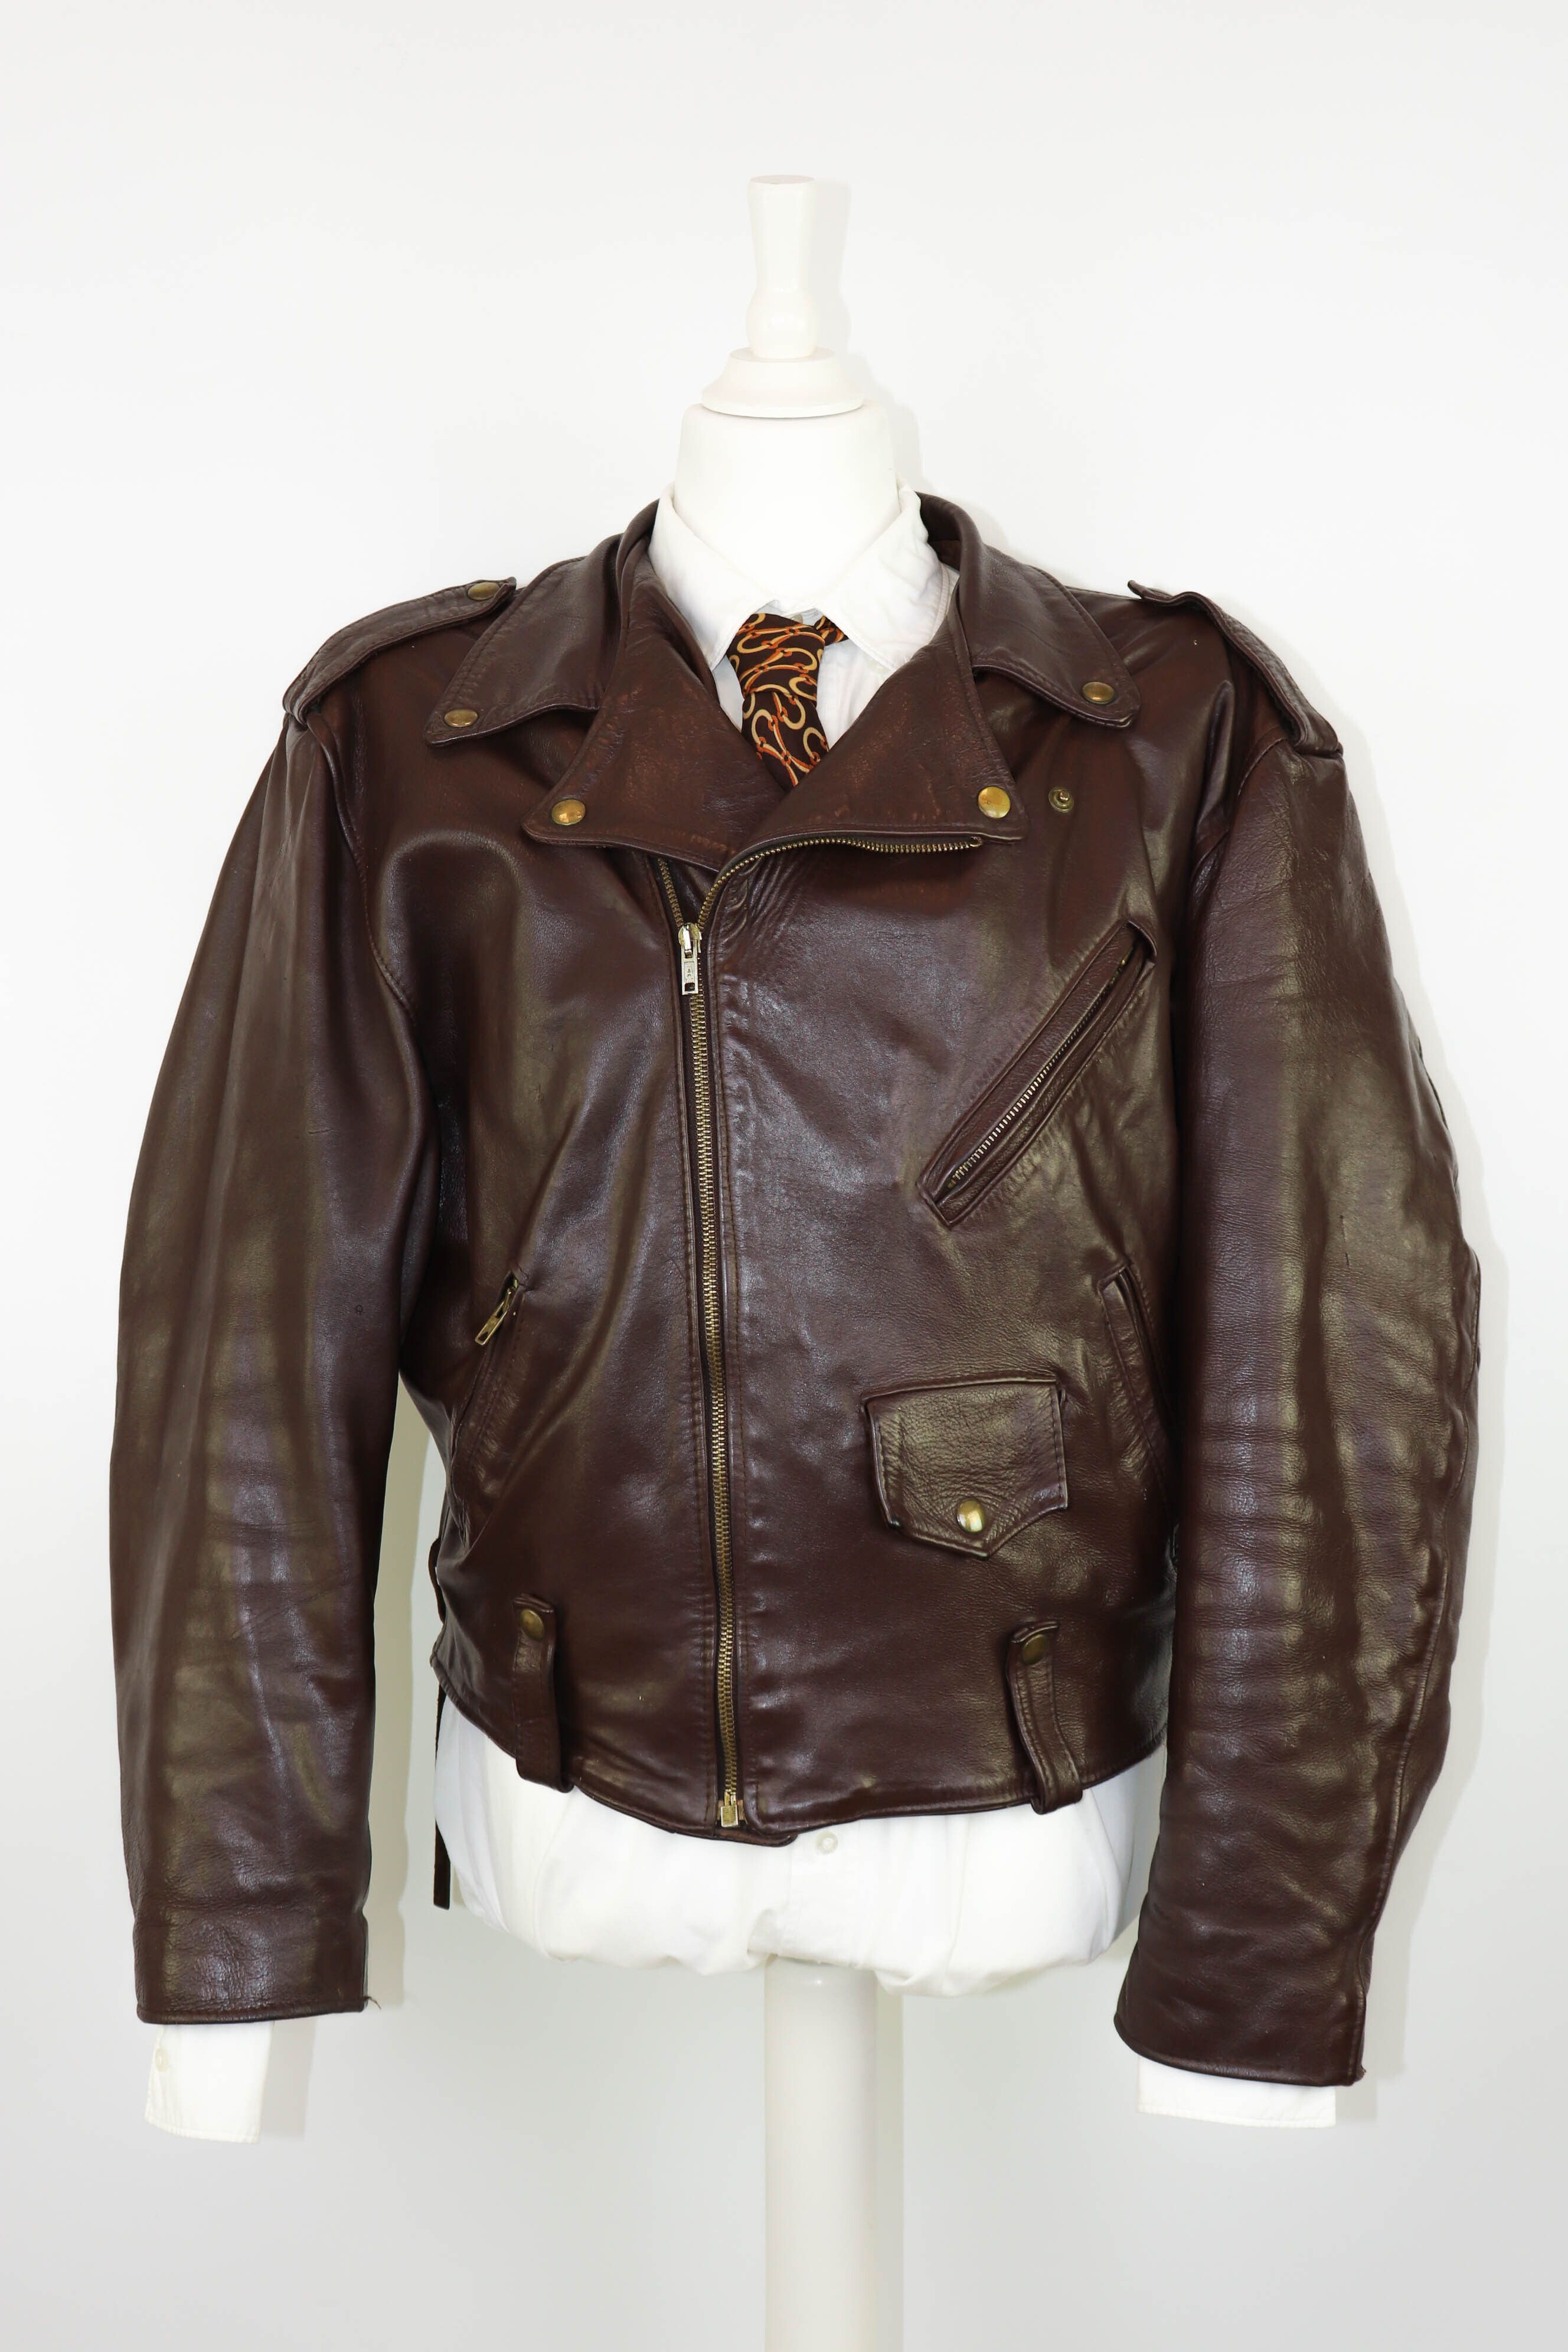 Pre-owned Leather Jacket X Vintage Nevadacuir Vintage 70's 80's French Brown Leather Biker Jacket (size Large)